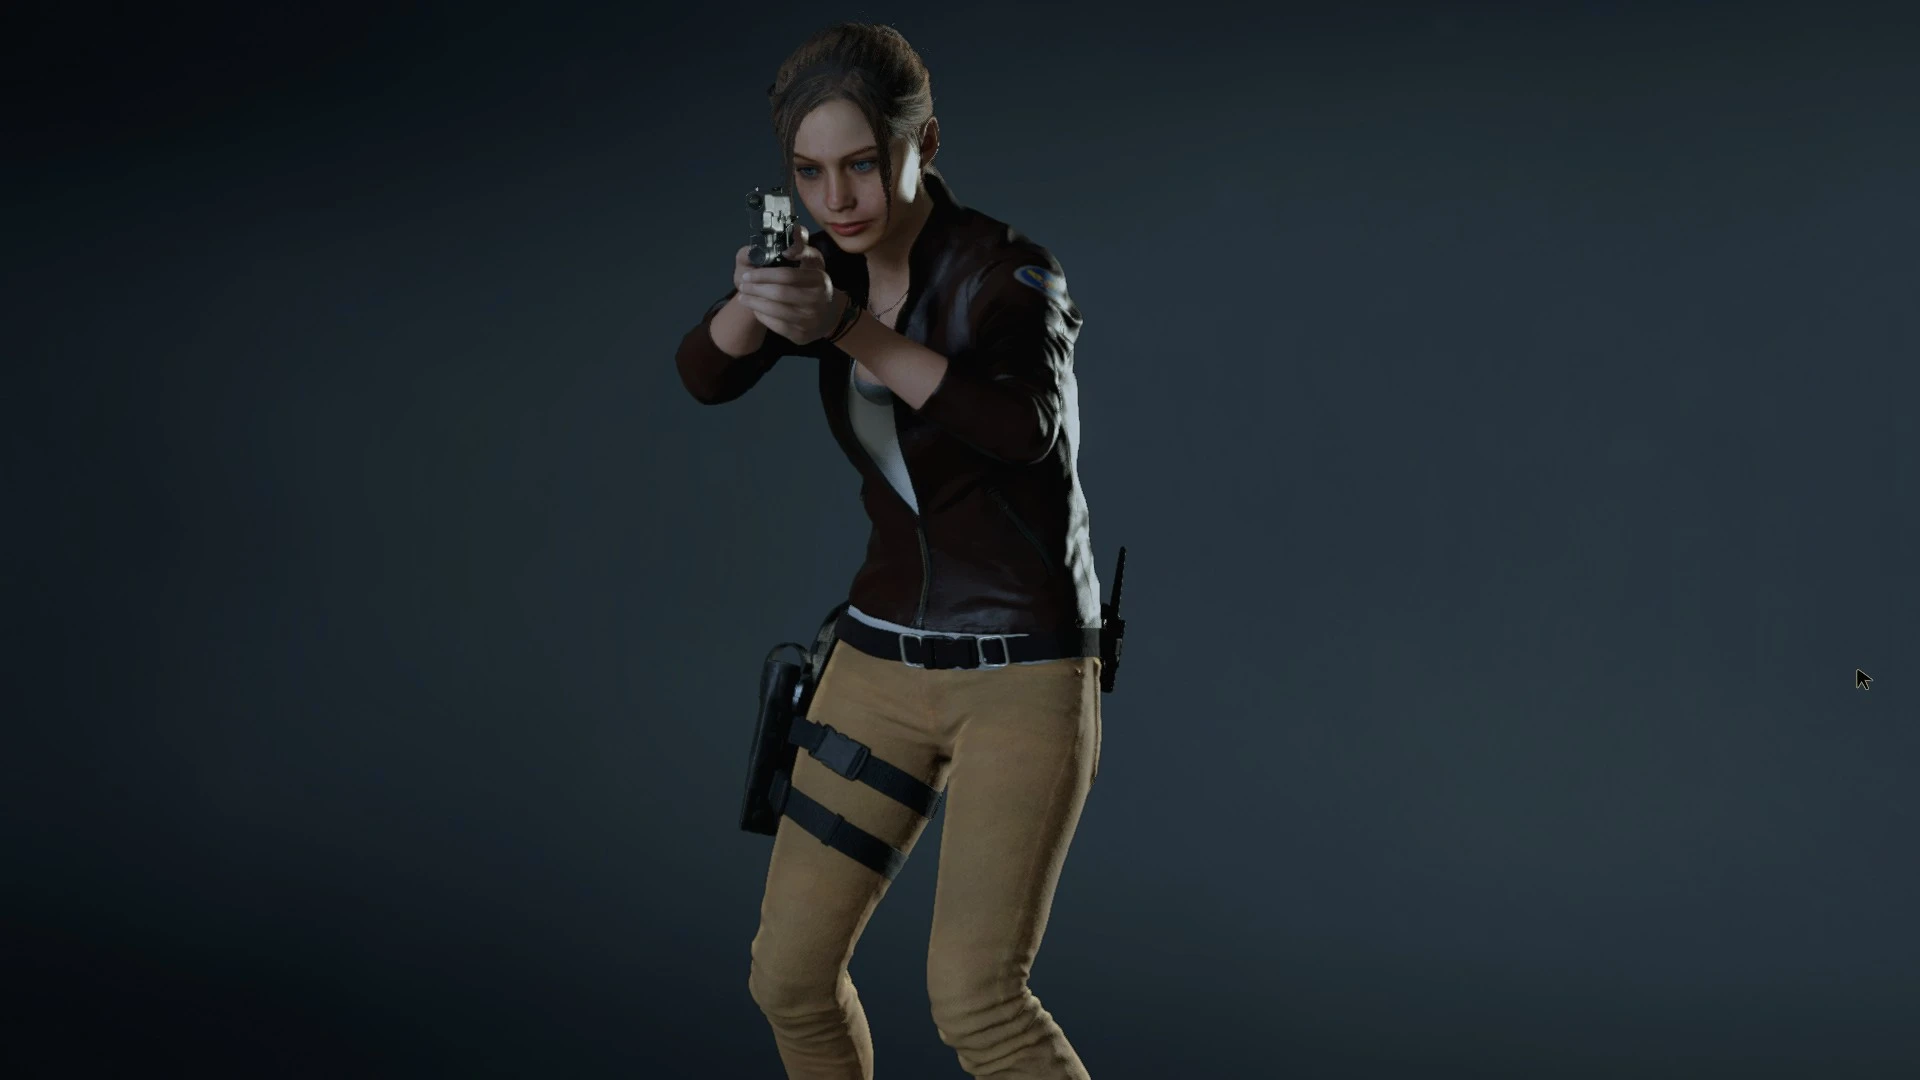 Made In Heaven Pack Normal Outfit Recolors At Resident Evil 2 2019 Nexus Mods And Community 0700